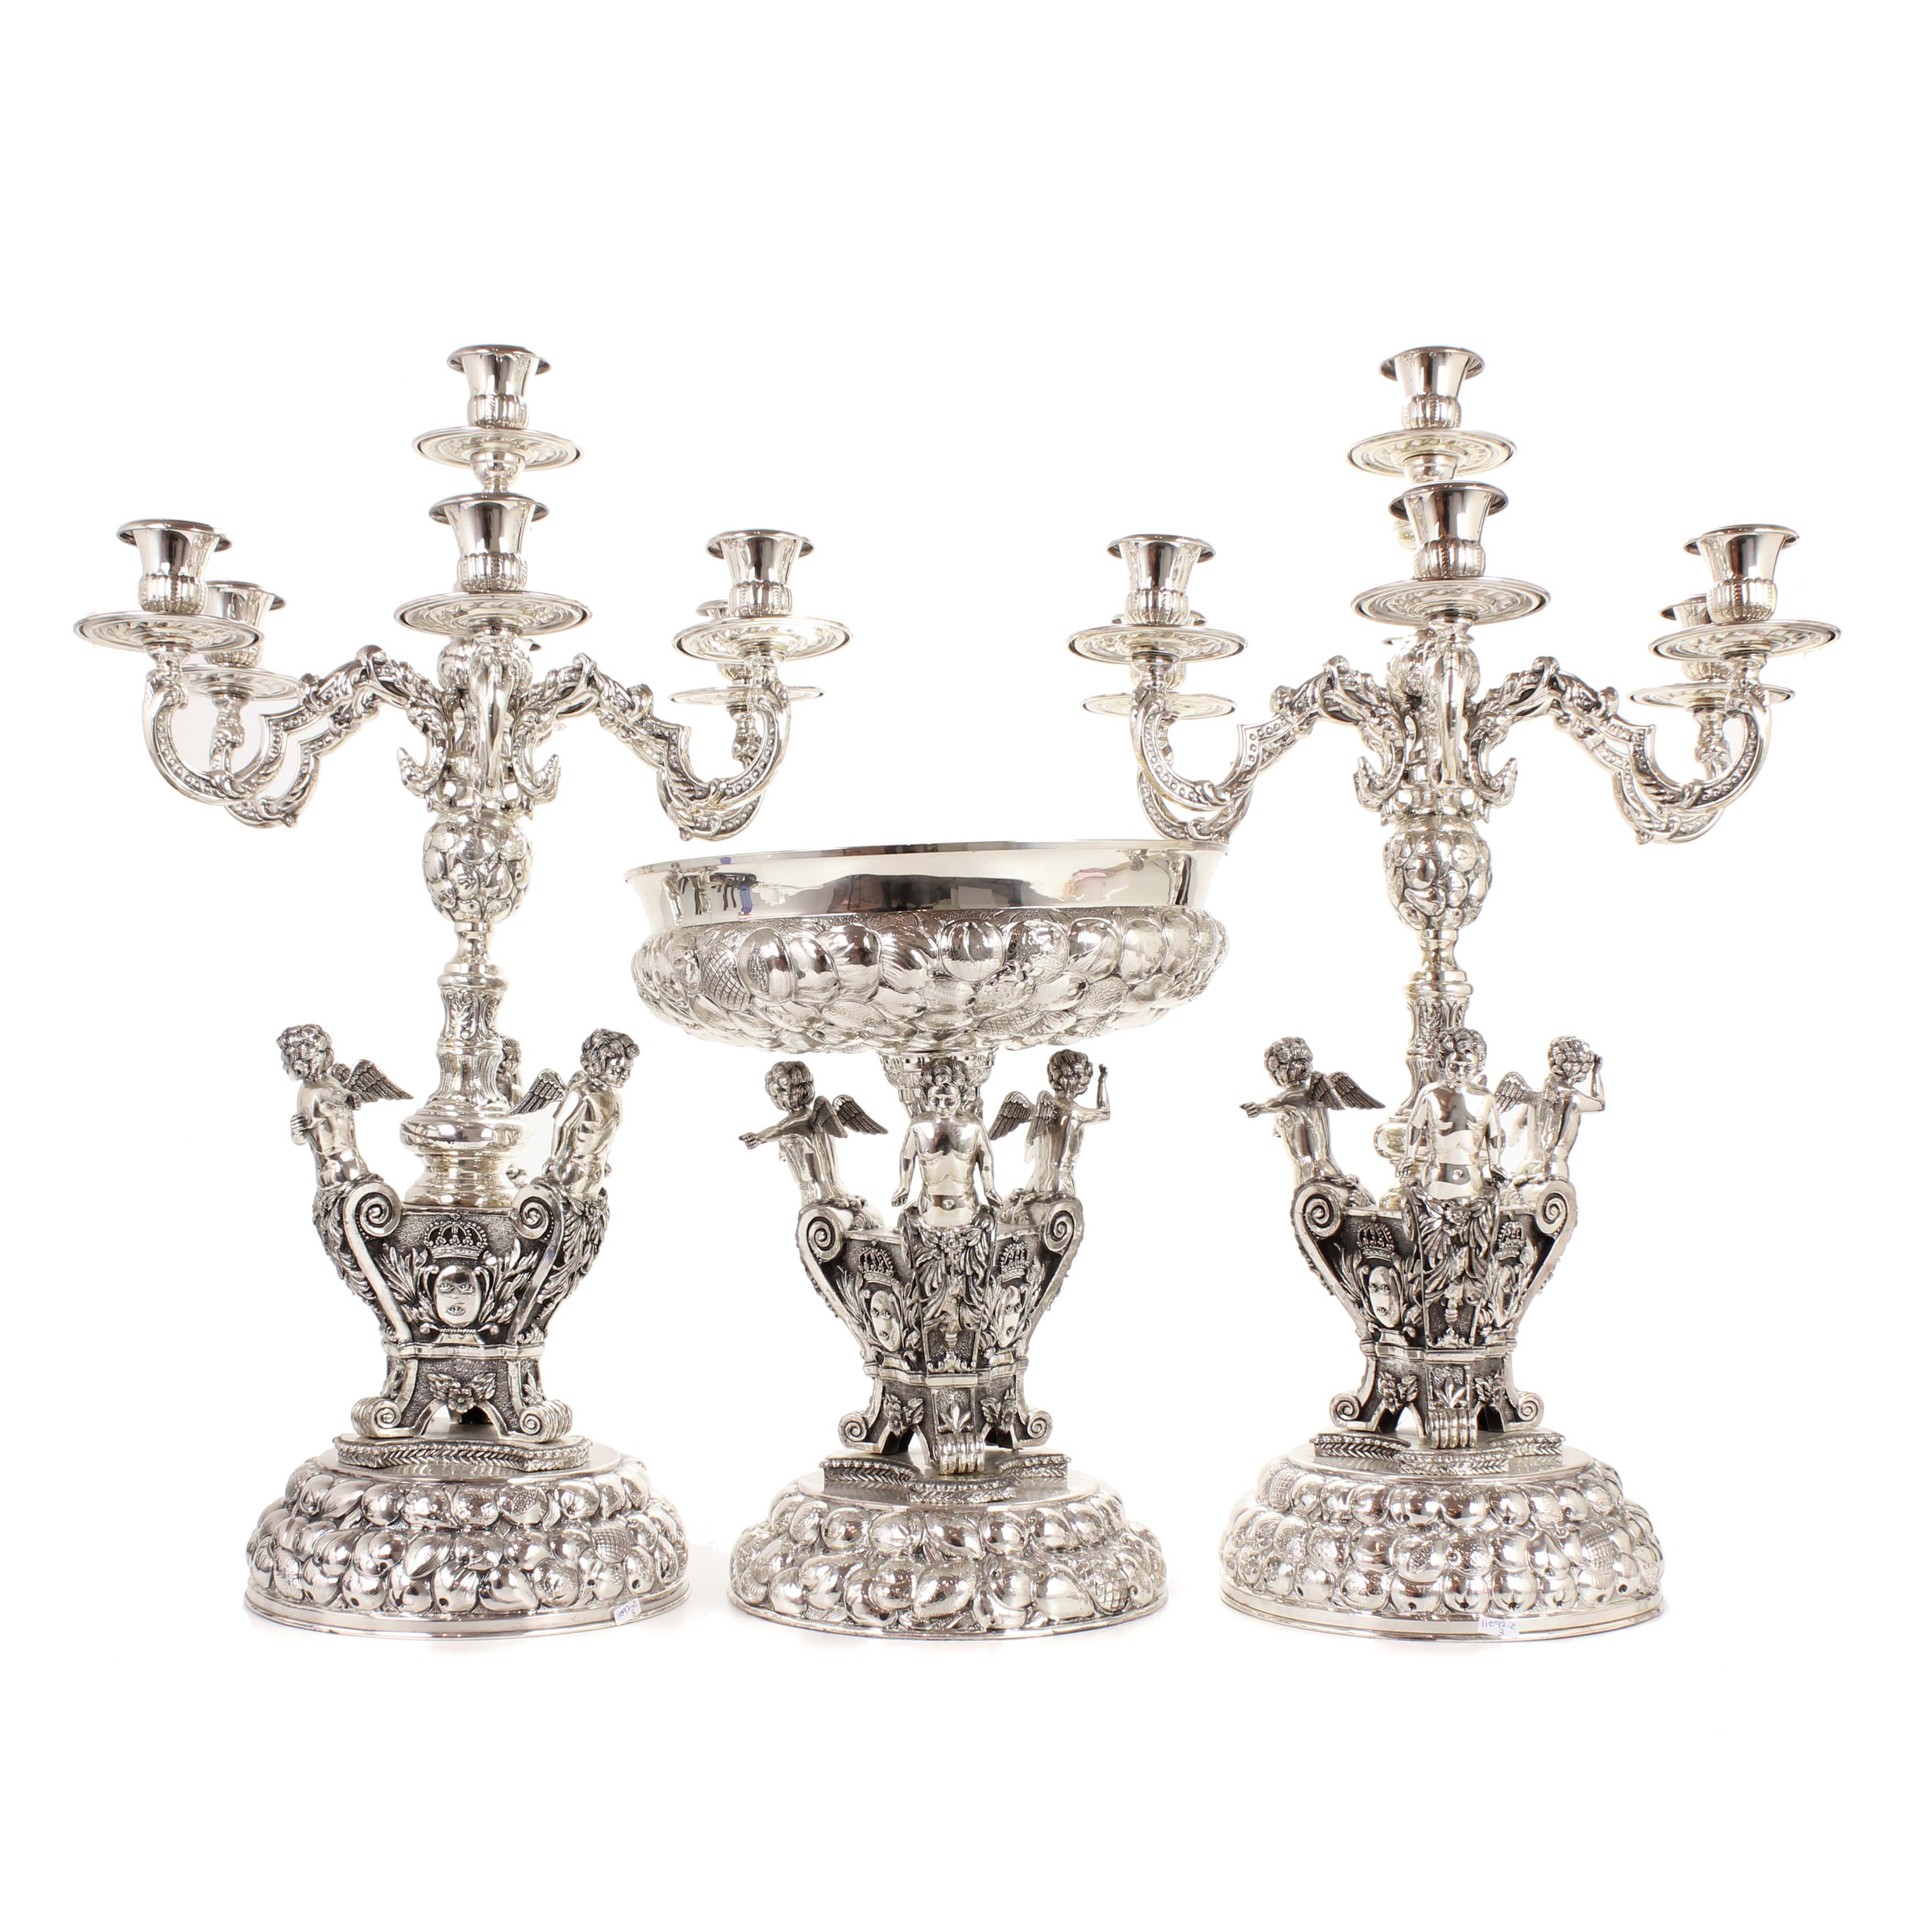 SILVER DECORATIVE CENTRE PIECE AND PAIR OF CANDELABRAS, MID